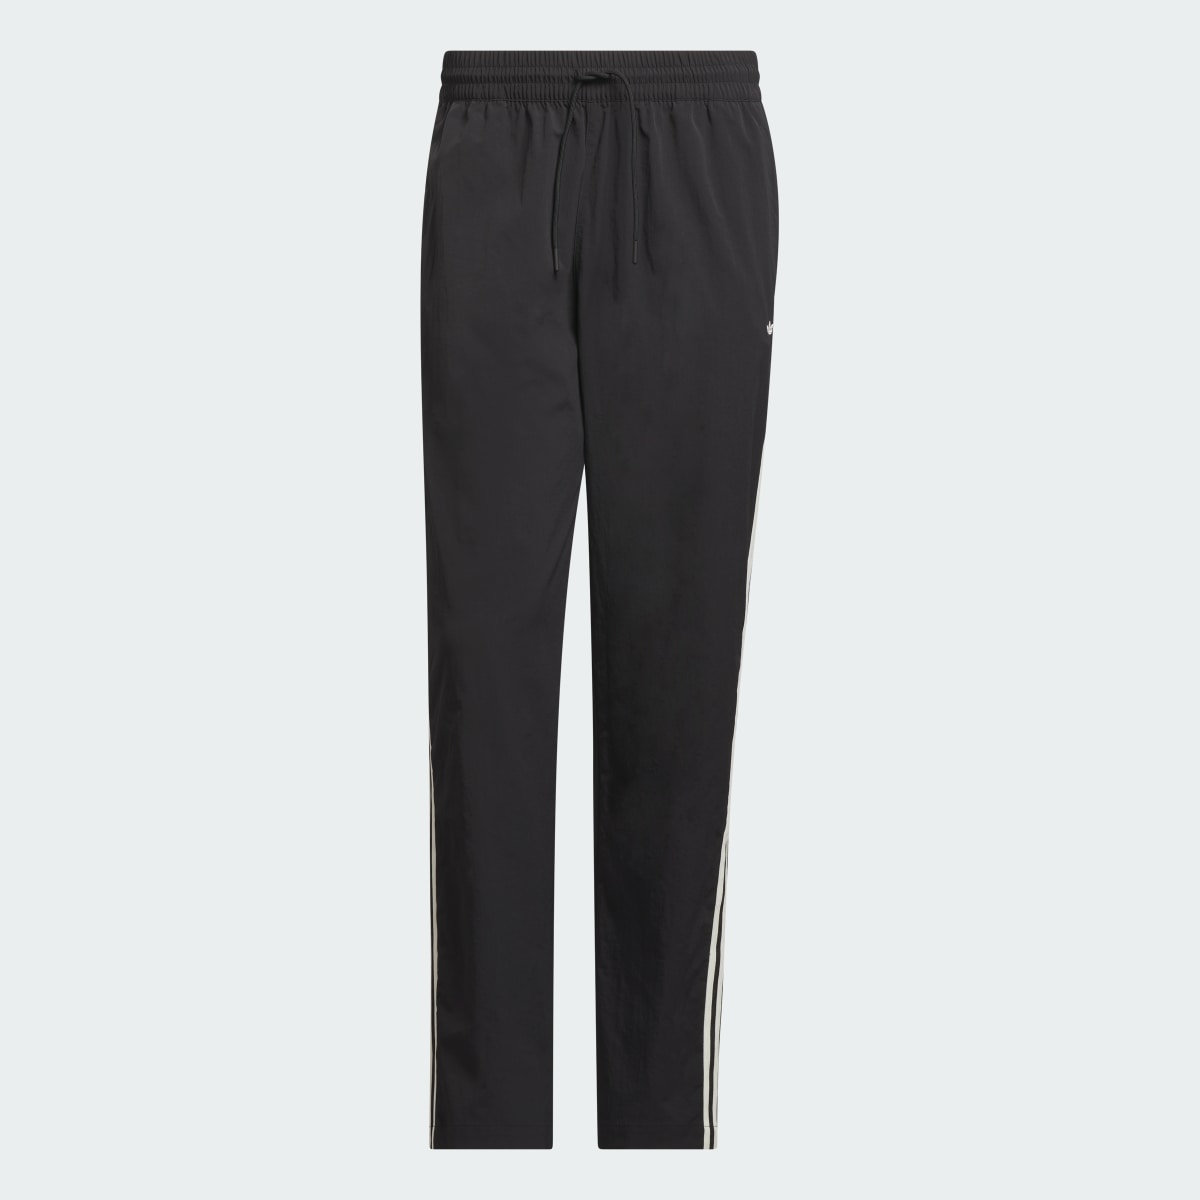 Adidas Basketball Track Suit Pants (Gender Neutral). 4